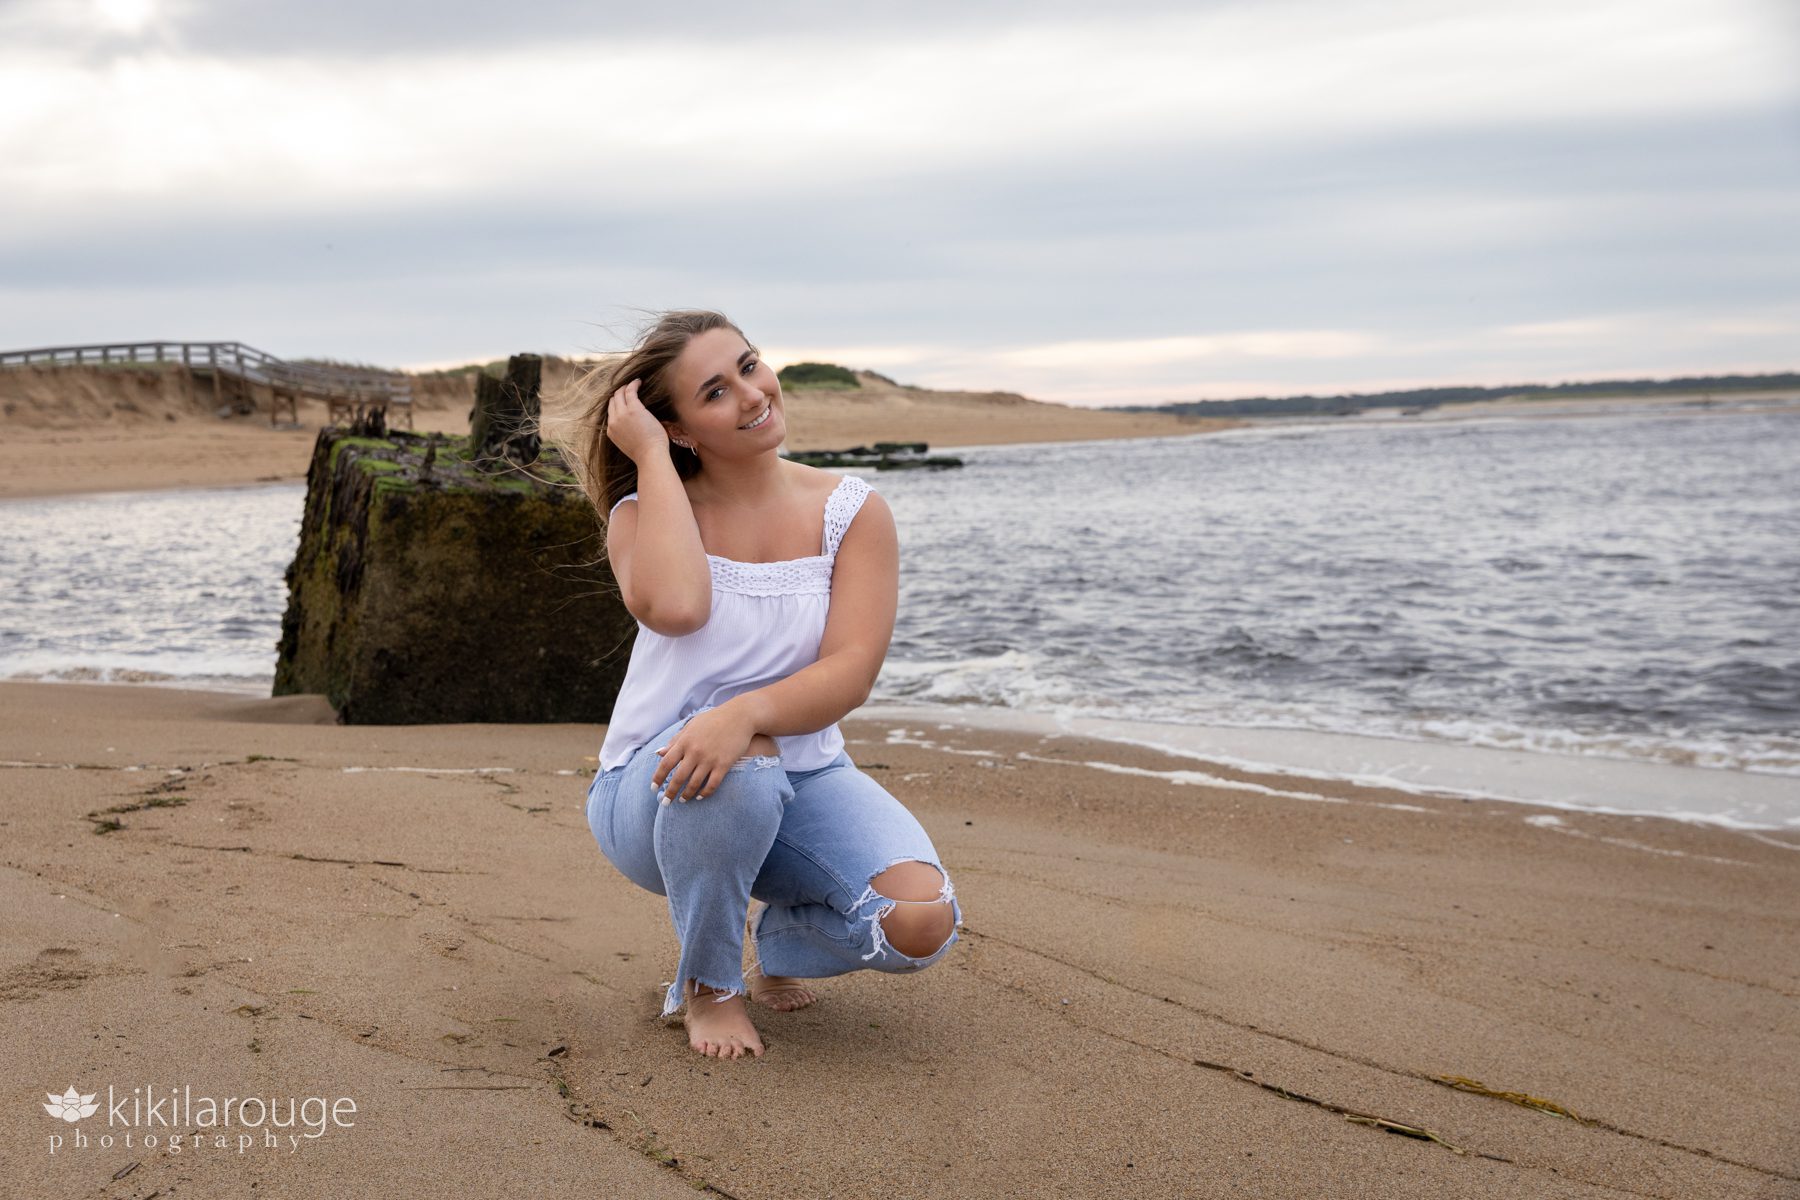 Triton Senior Portrait Girl in Jeans with white top tied in back at beach water's edge